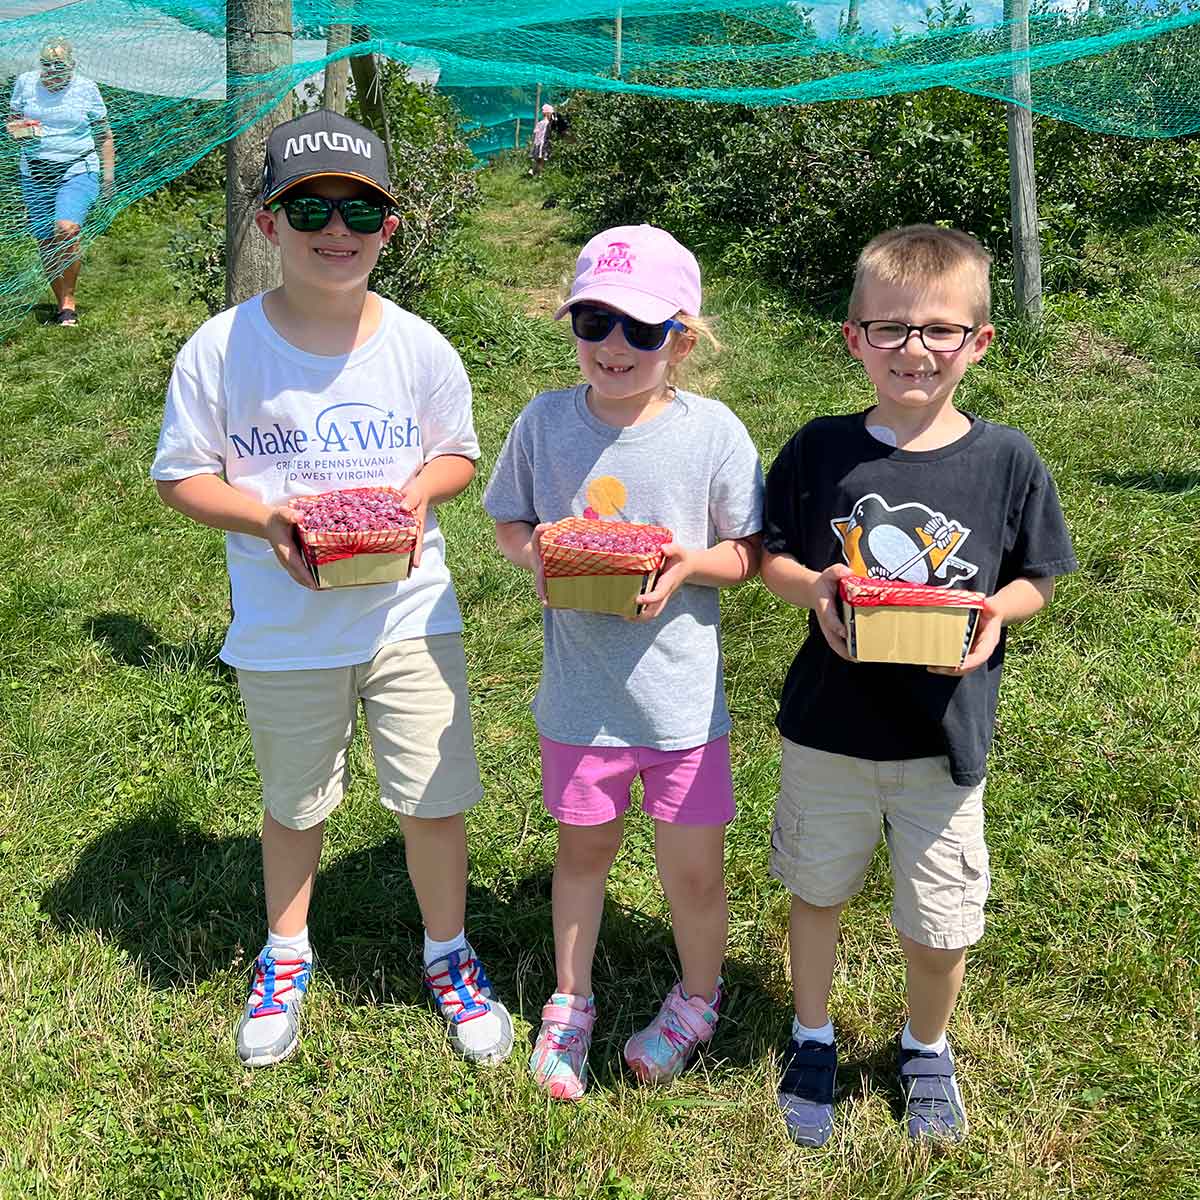 Three kids holding baskets of blueberries in front of a blueberry patch.